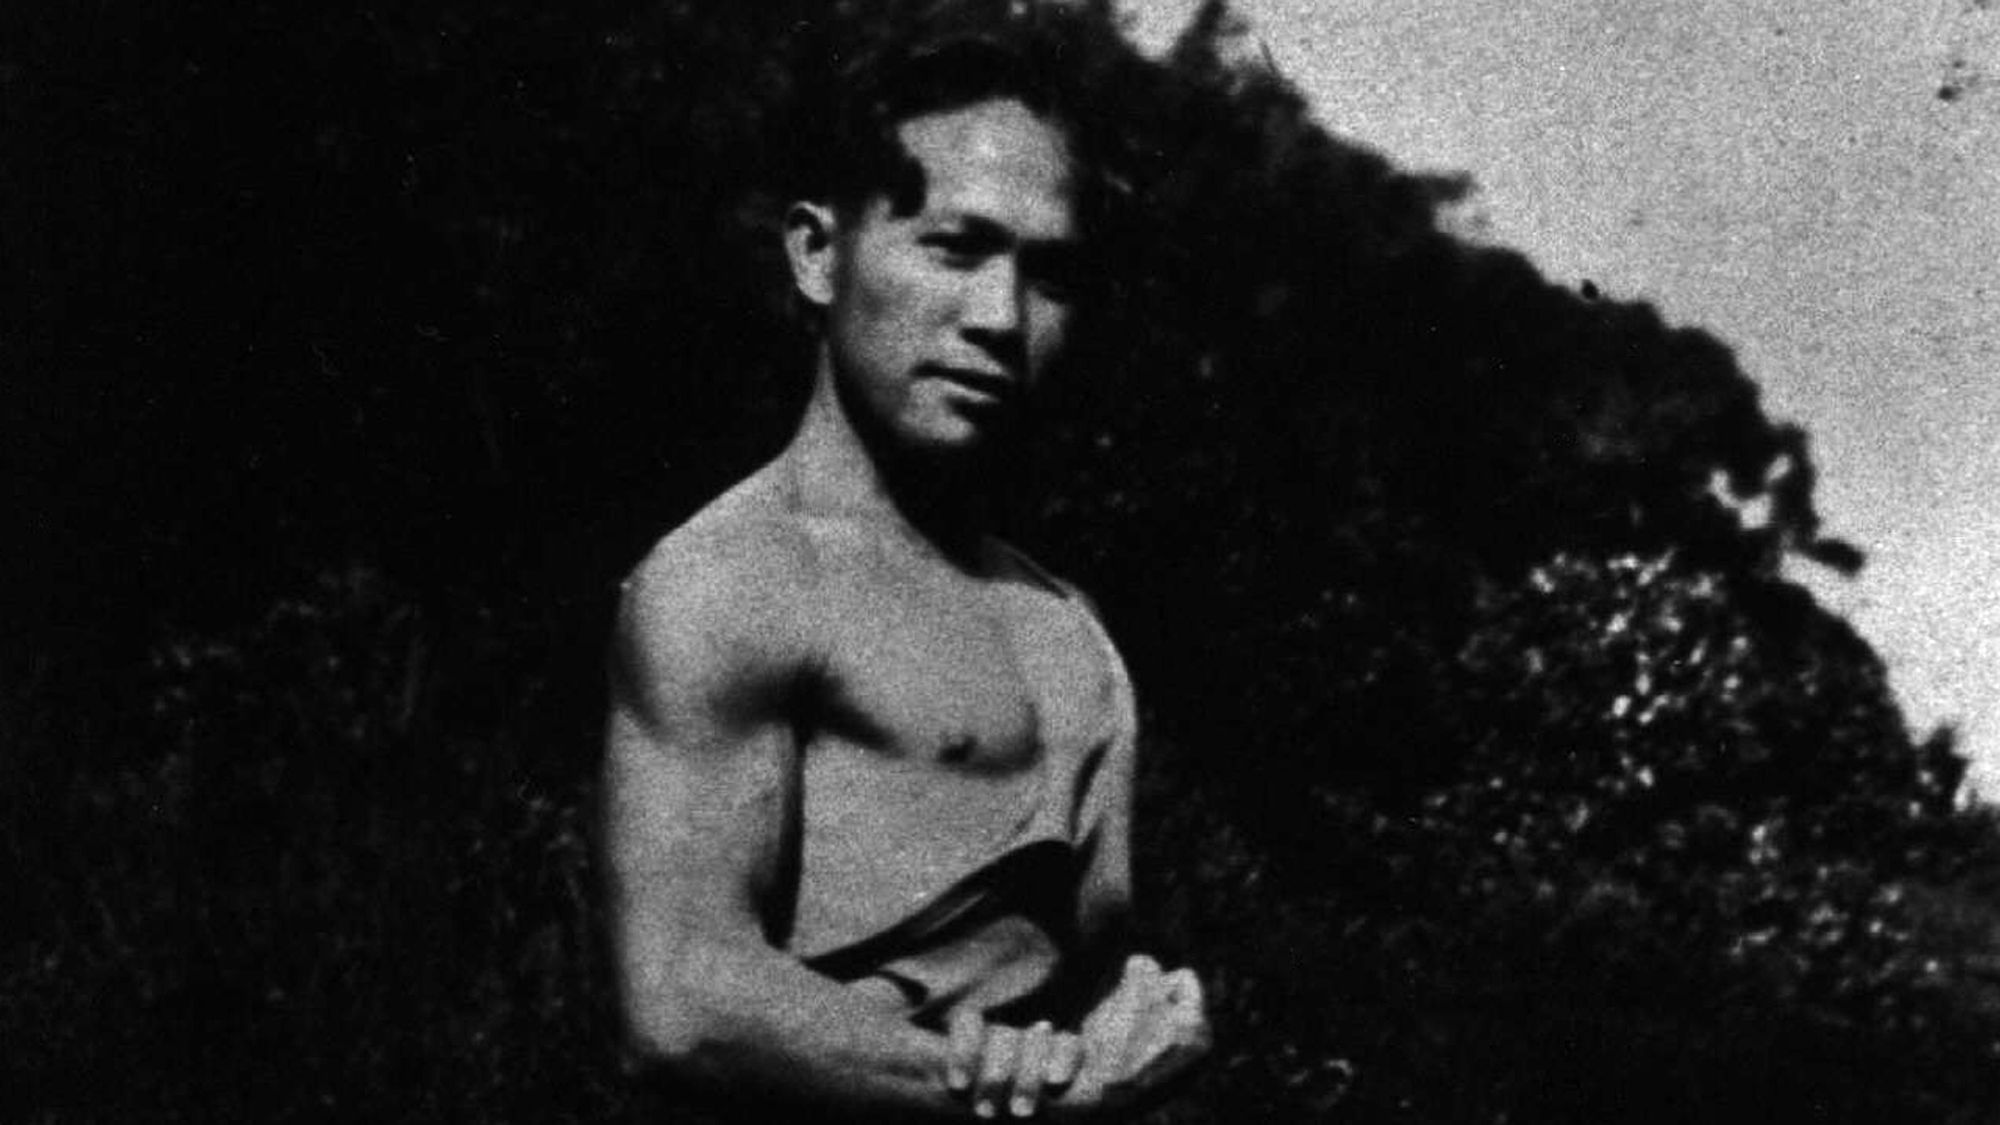 A black and white photograph of a young shirtless man who is Albert Banua, the director Anthony Banua-Simon's great grandfather